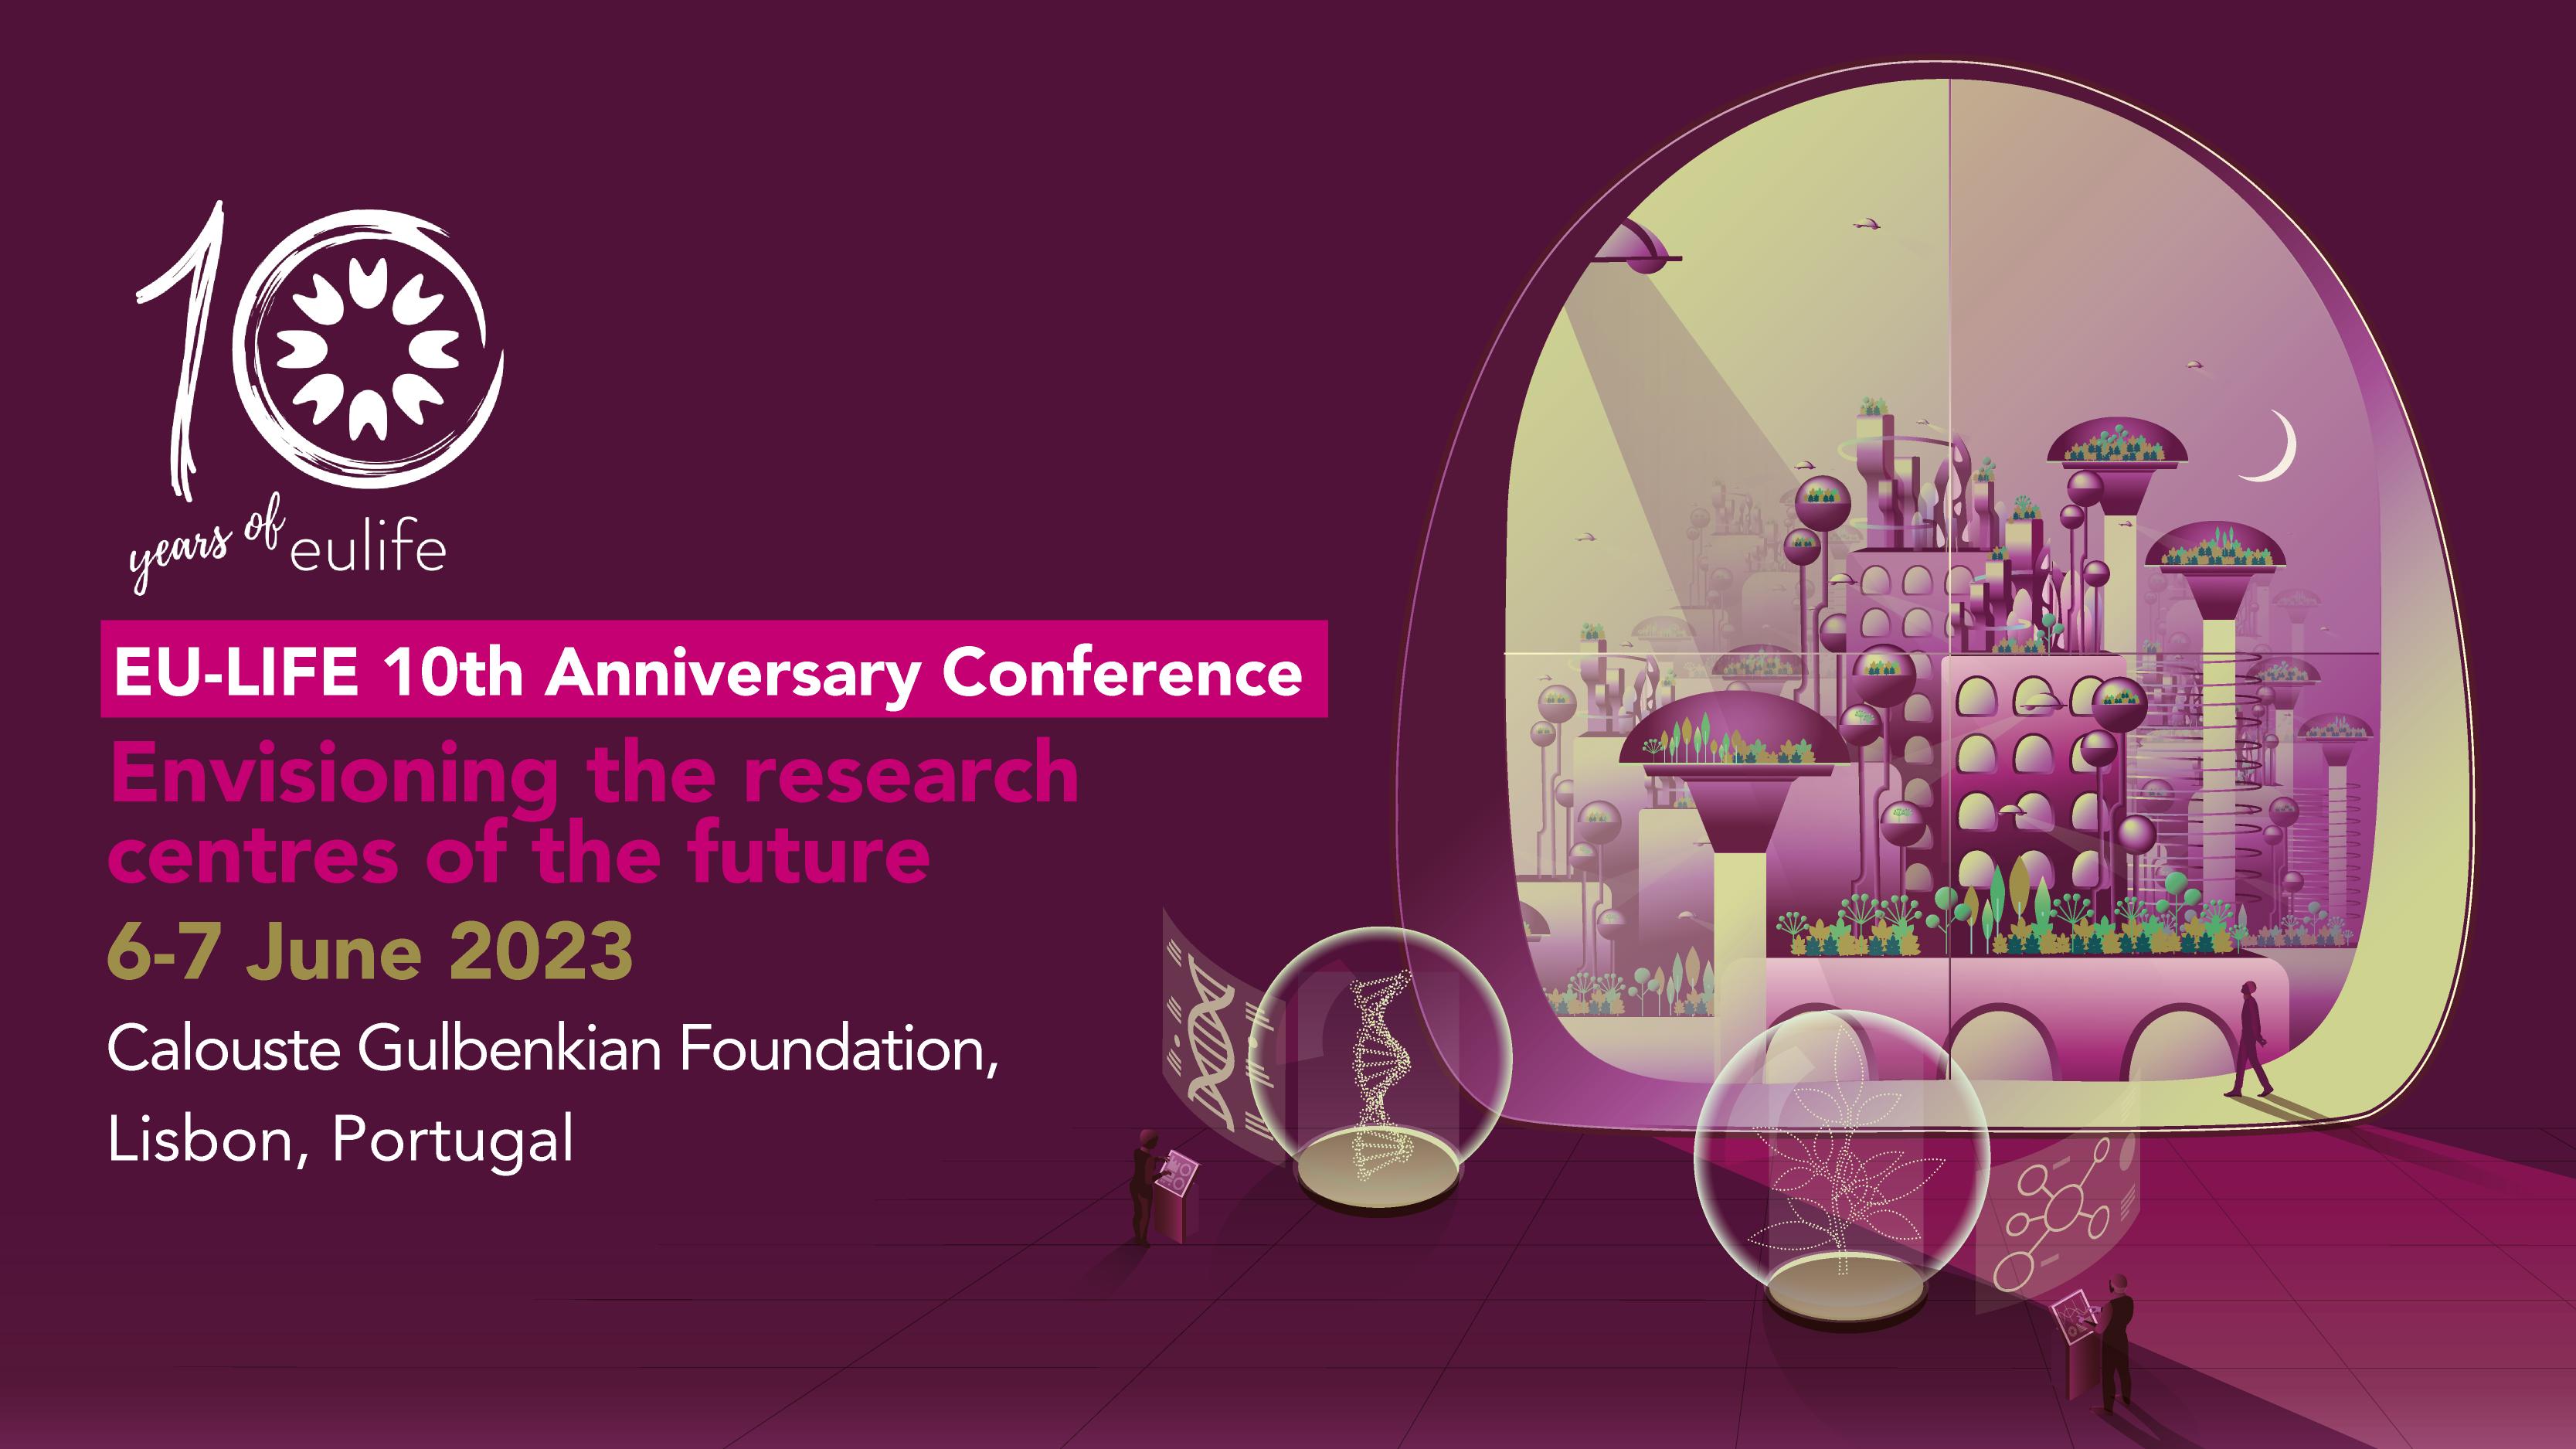 EU-LIFE conference ‘Envisioning the research places of the future’